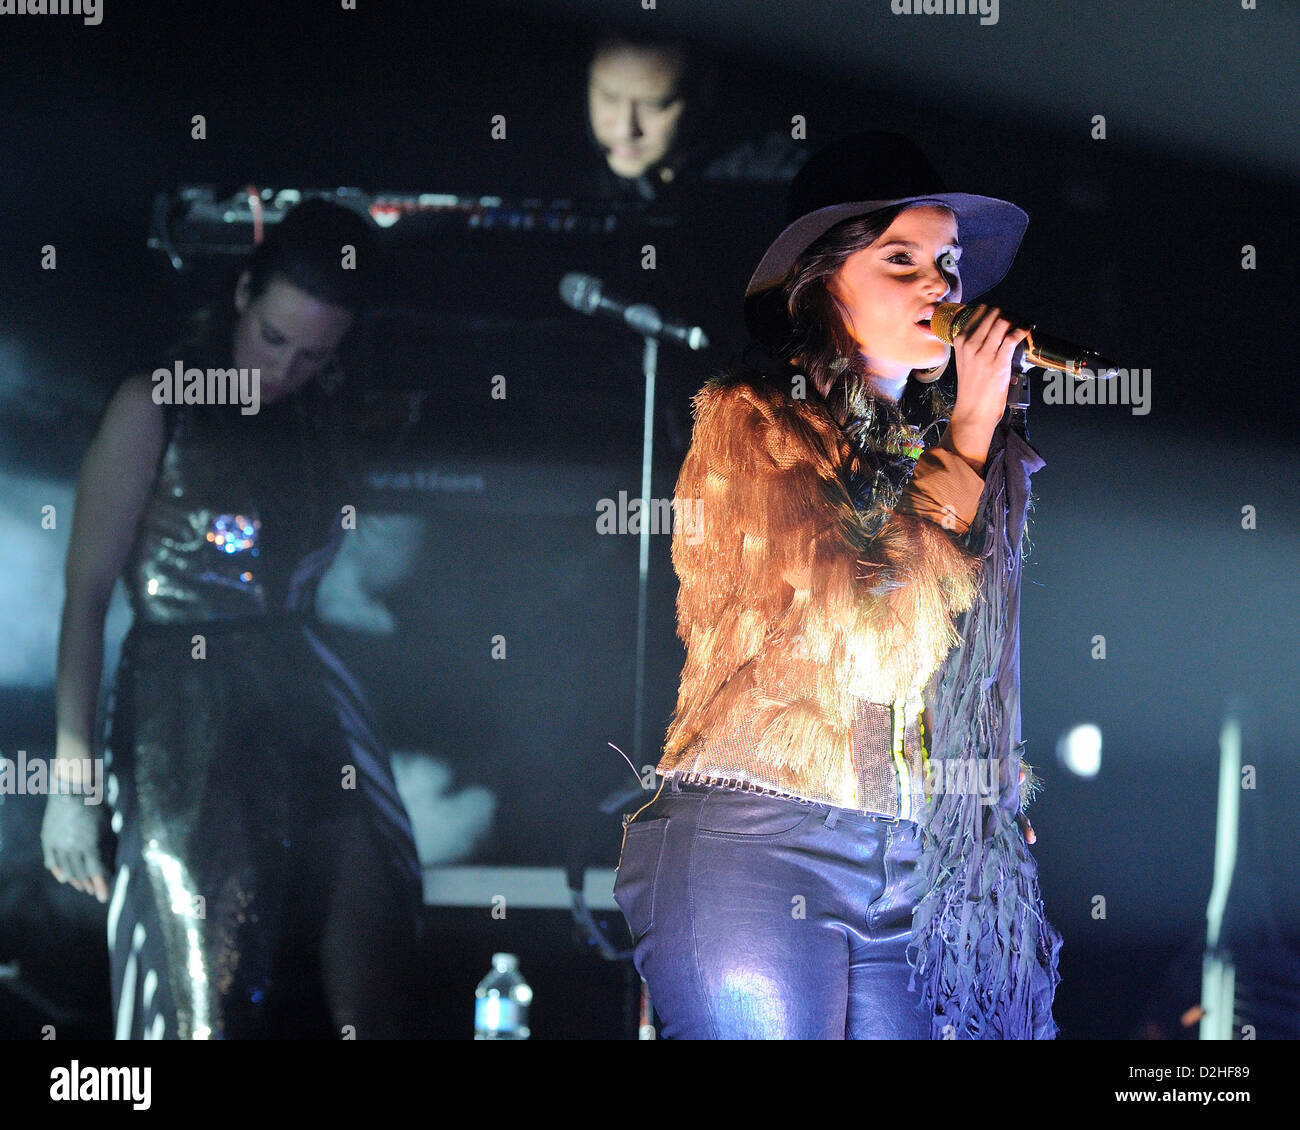 January 24, 2013. Toronto, Canada. Nelly Furtado performs during her The Spirit Indestructible Tour  at the Sony Centre for the Performing Arts. Furtado is current on tour in support of her fifth studio album The Spirit Indestructible released on September 14, 2012.  (DCP/N8N/Alamy live news) Stock Photo